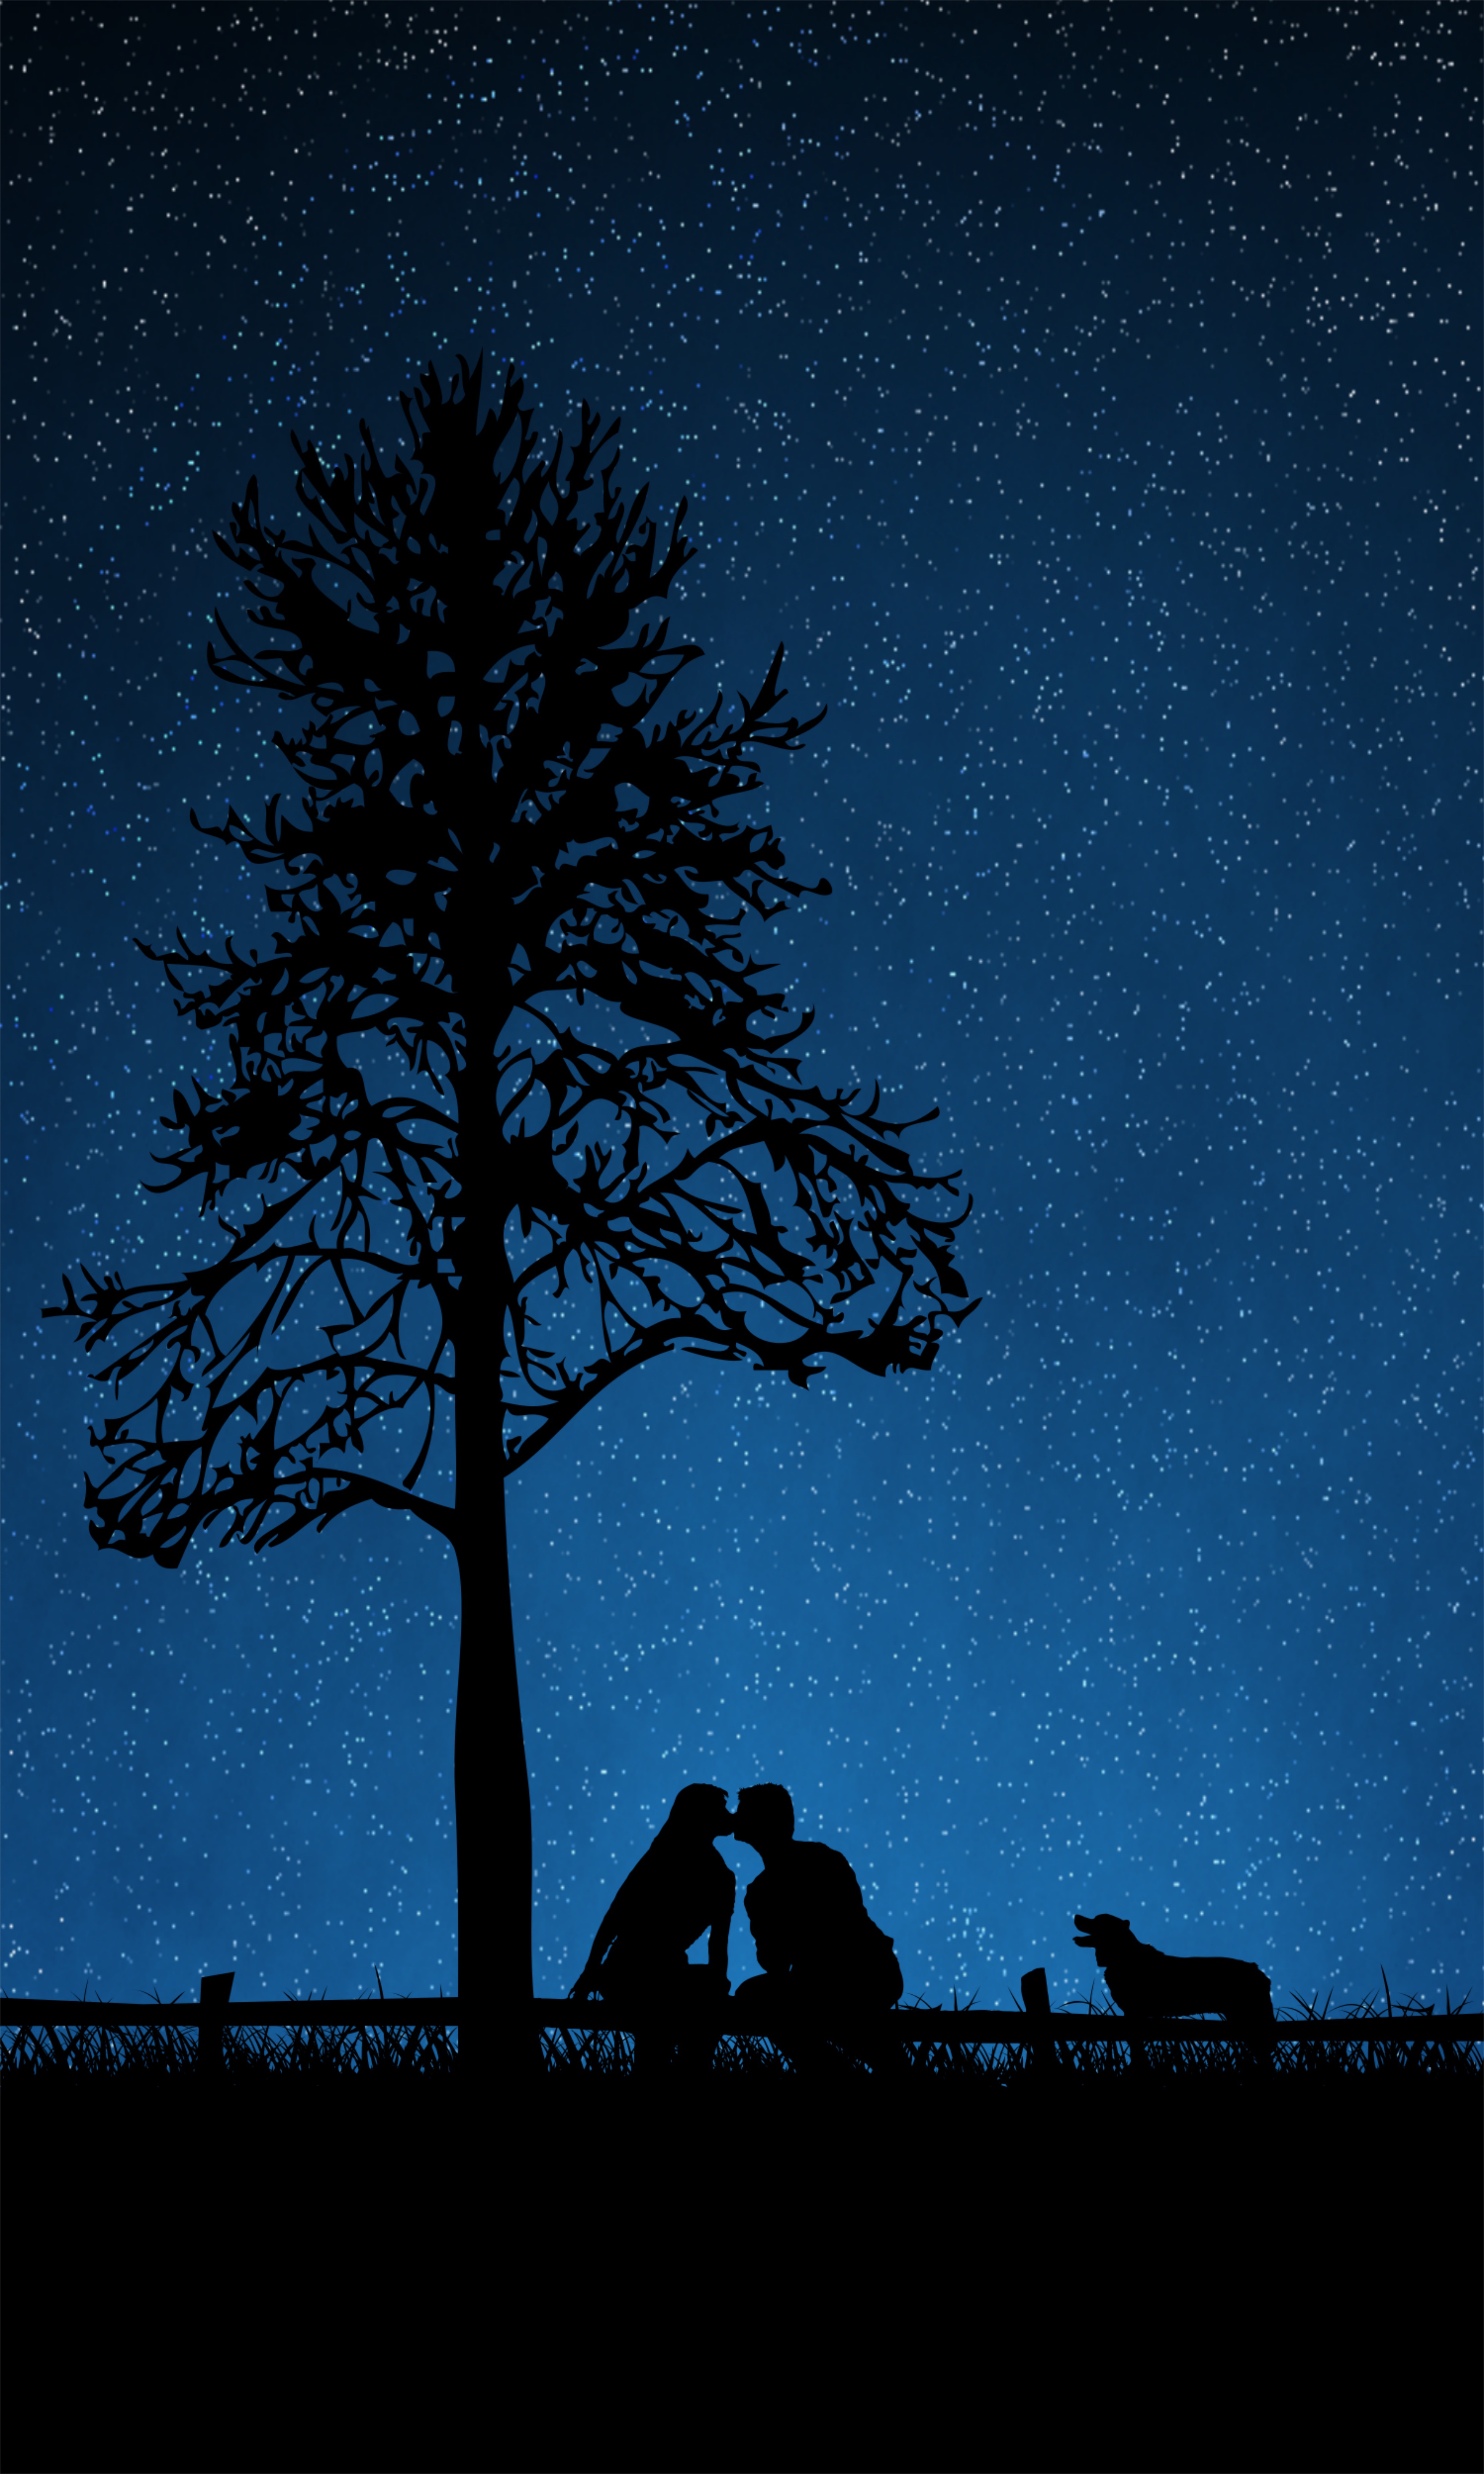 kiss, couple, pair, love, wood, tree, dog, silhouettes, starry sky iphone wallpaper